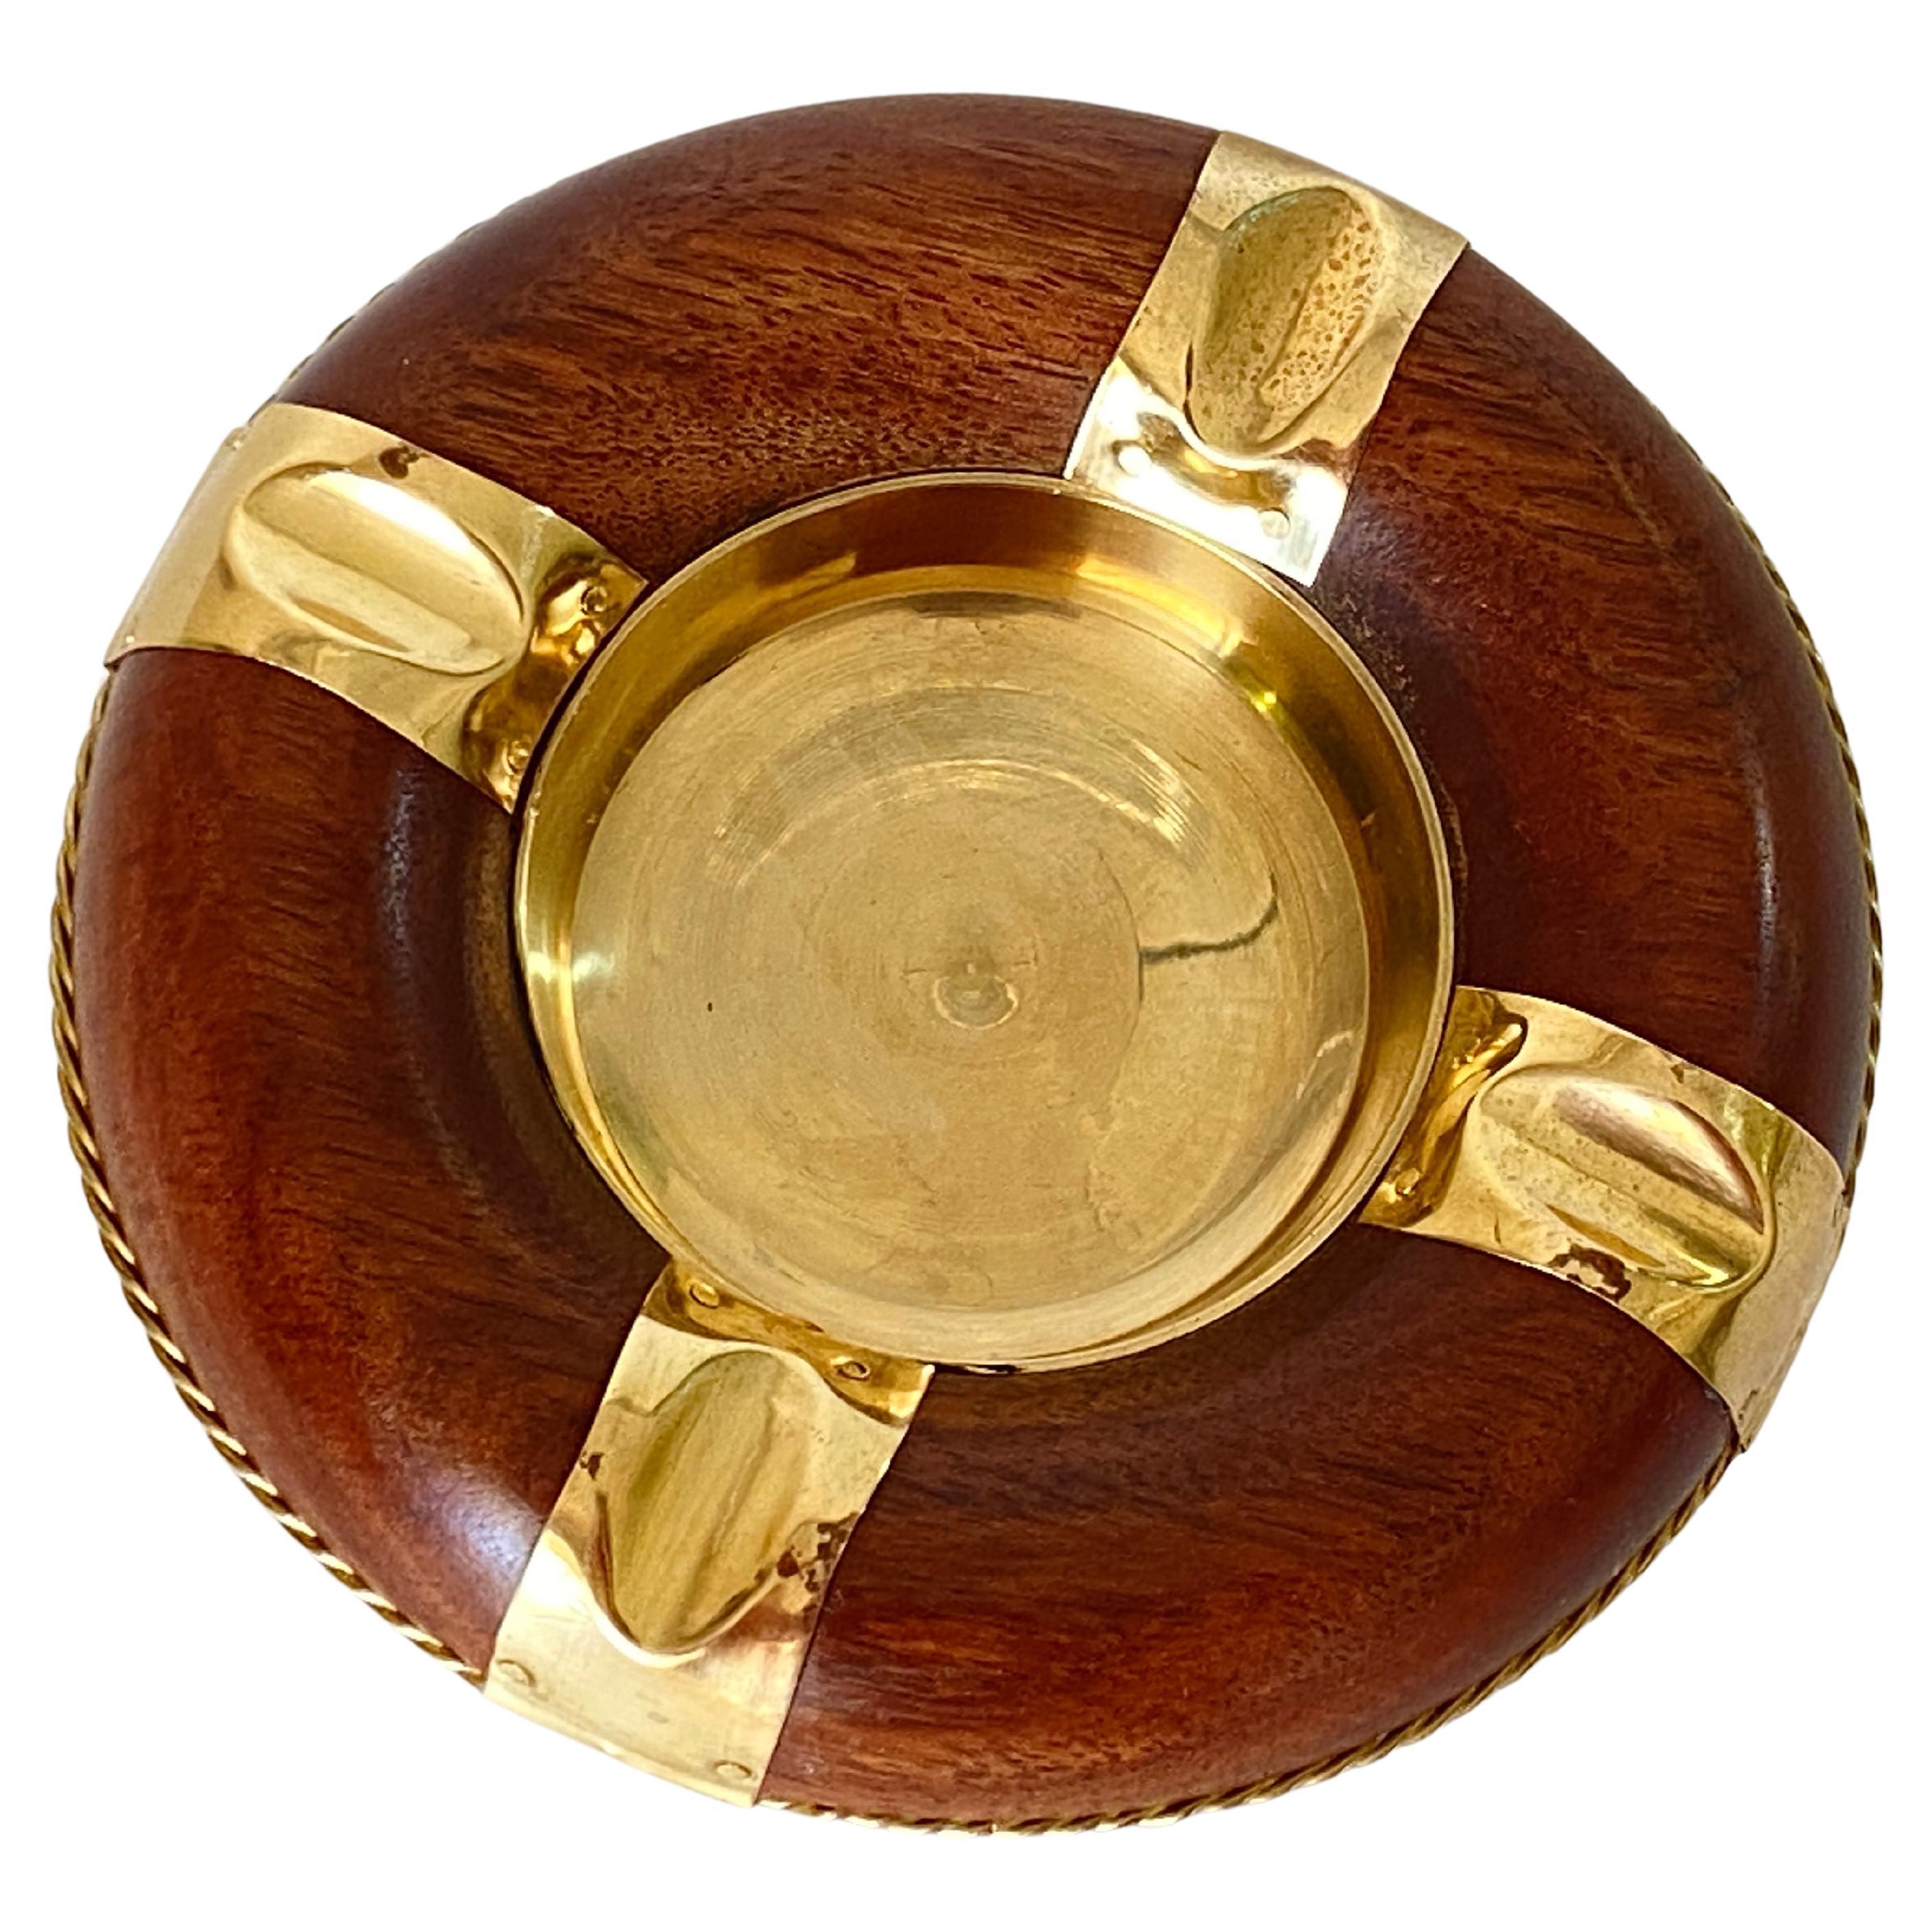 1970 Solid Wood and Brass Ashtray, France , Brown and Gold Color